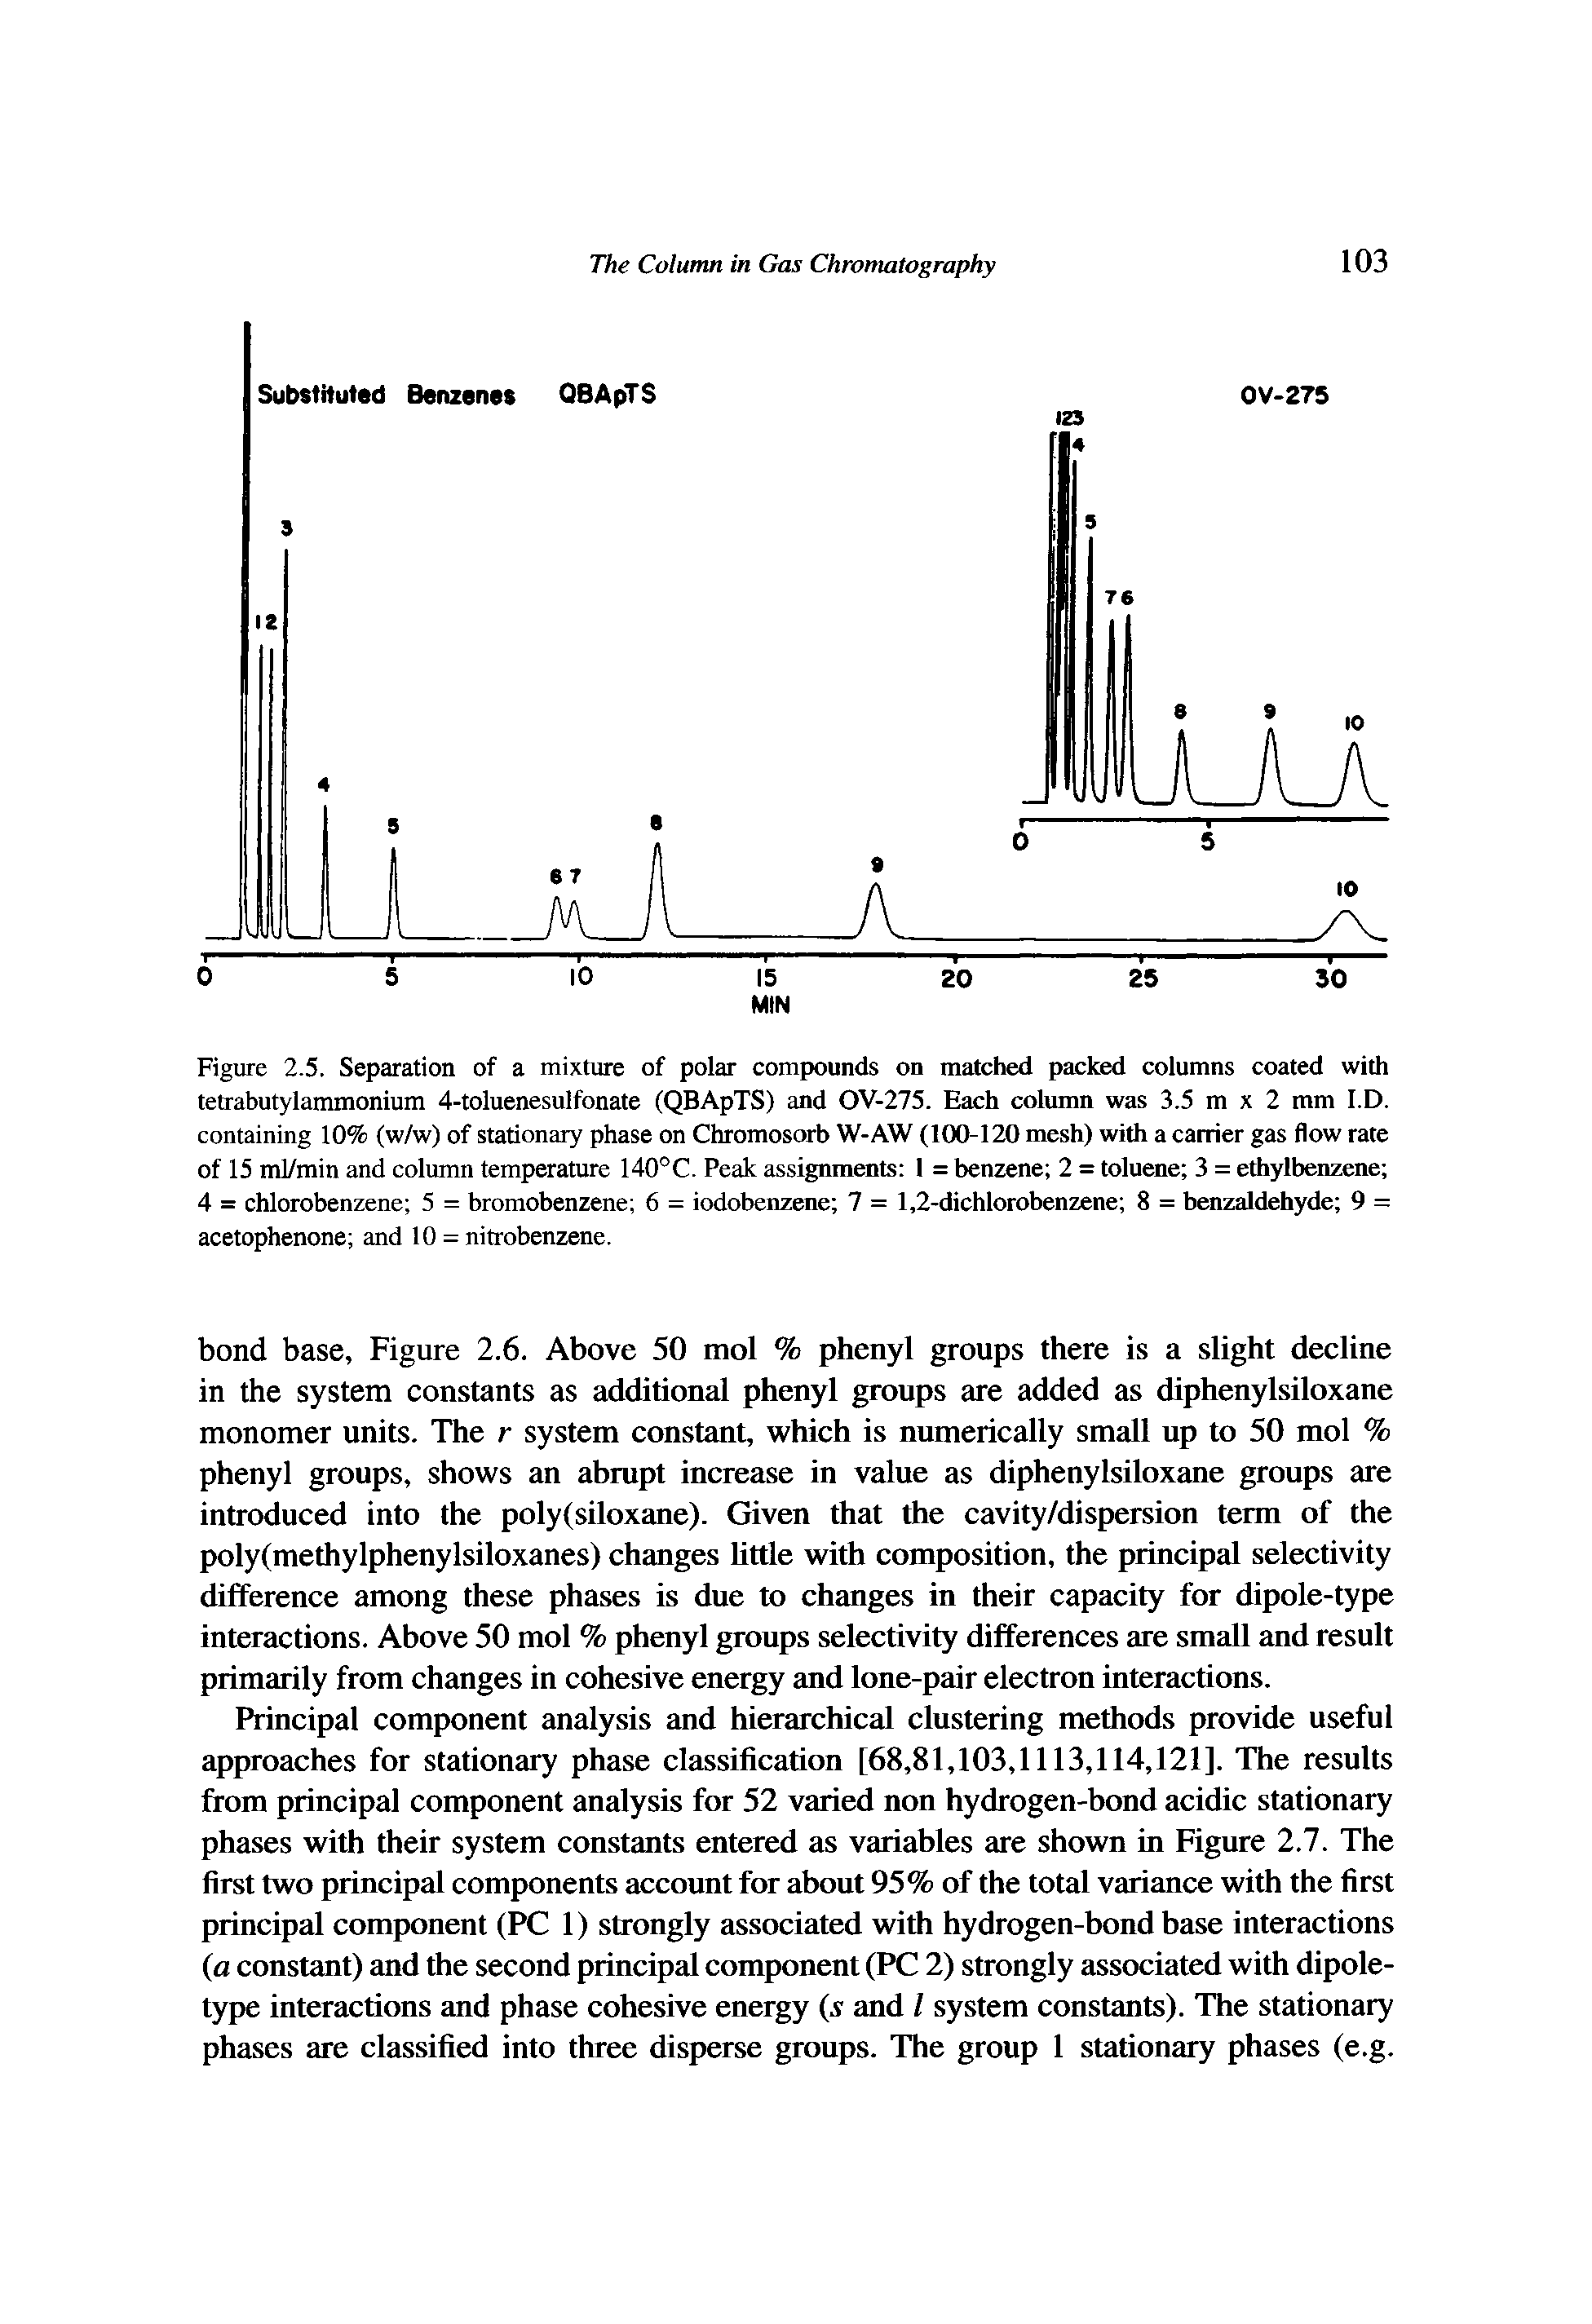 Figure 2.5. Separation of a mixture of polar compounds on matched packed columns coated with tetrabutylammonium 4-toluenesulfonate (QBApTS) and OV-275. Each column was 3.5 m x 2 mm l.D. containing 10% (w/w) of stationary phase on Chromosorb W-AW (100-120 mesh) with a carrier gas flow rate of 15 ml/min and column temperature 140°C. Peak assignments I = benzene 2 = toluene 3 = ethylbenzene 4 = chlorobenzene 5 = bromobenzene 6 = iodobenzene 7 = 1,2-dichlorobenzene 8 = benzaldehyde 9 = acetophenone and 10 = nitrobenzene.